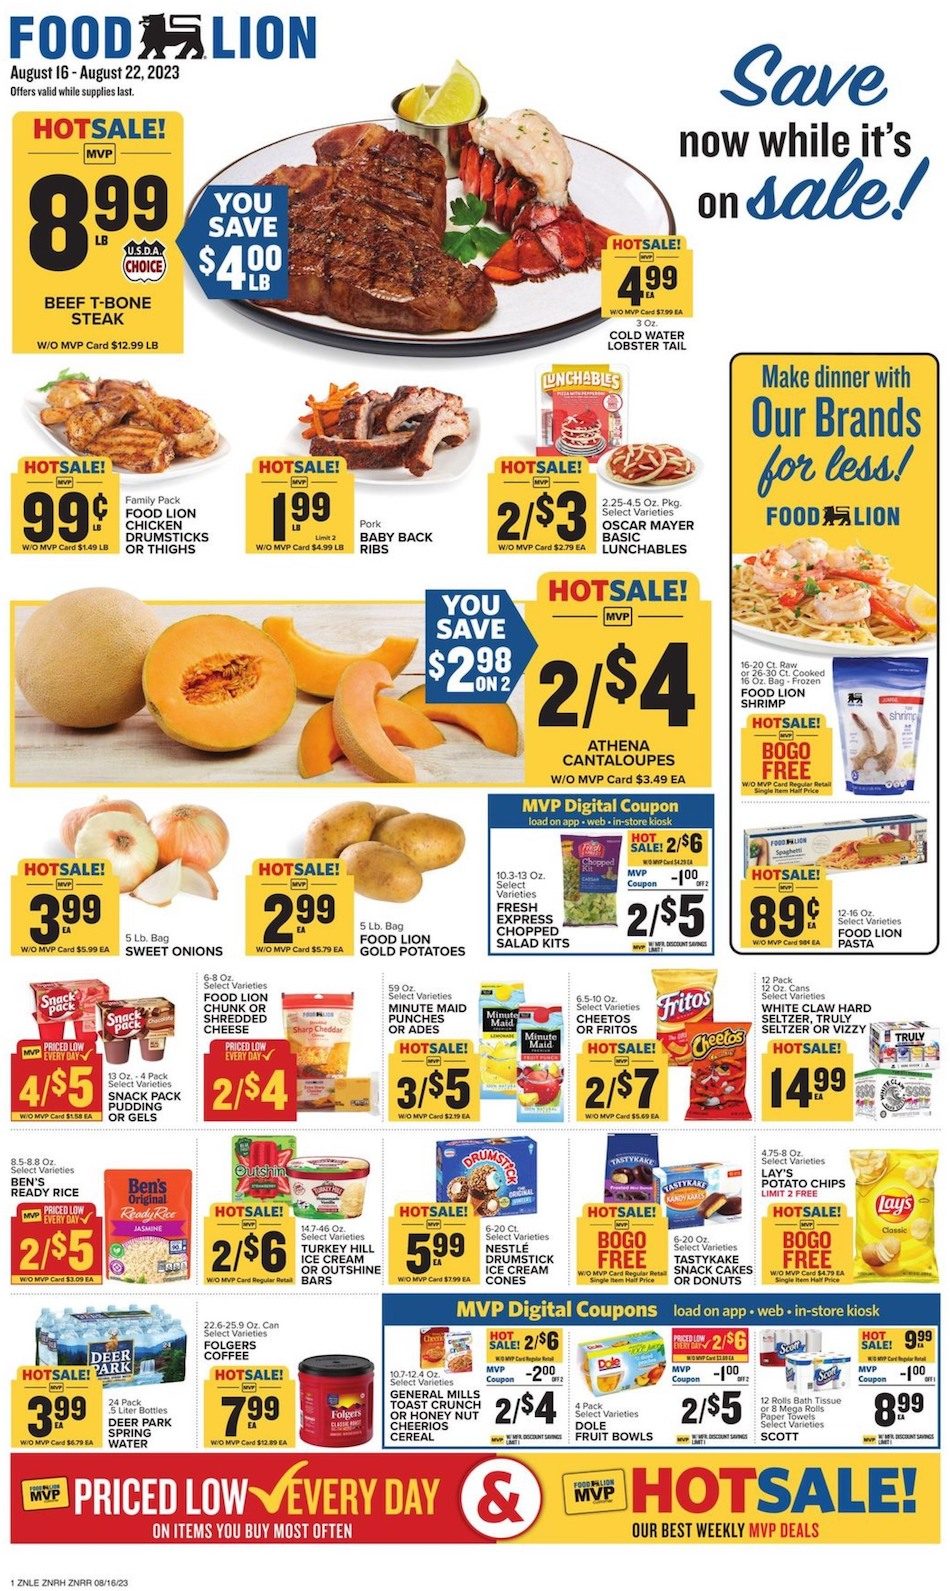 Food Lion Weekly Ad 16th – 22nd August 2023 Page 1